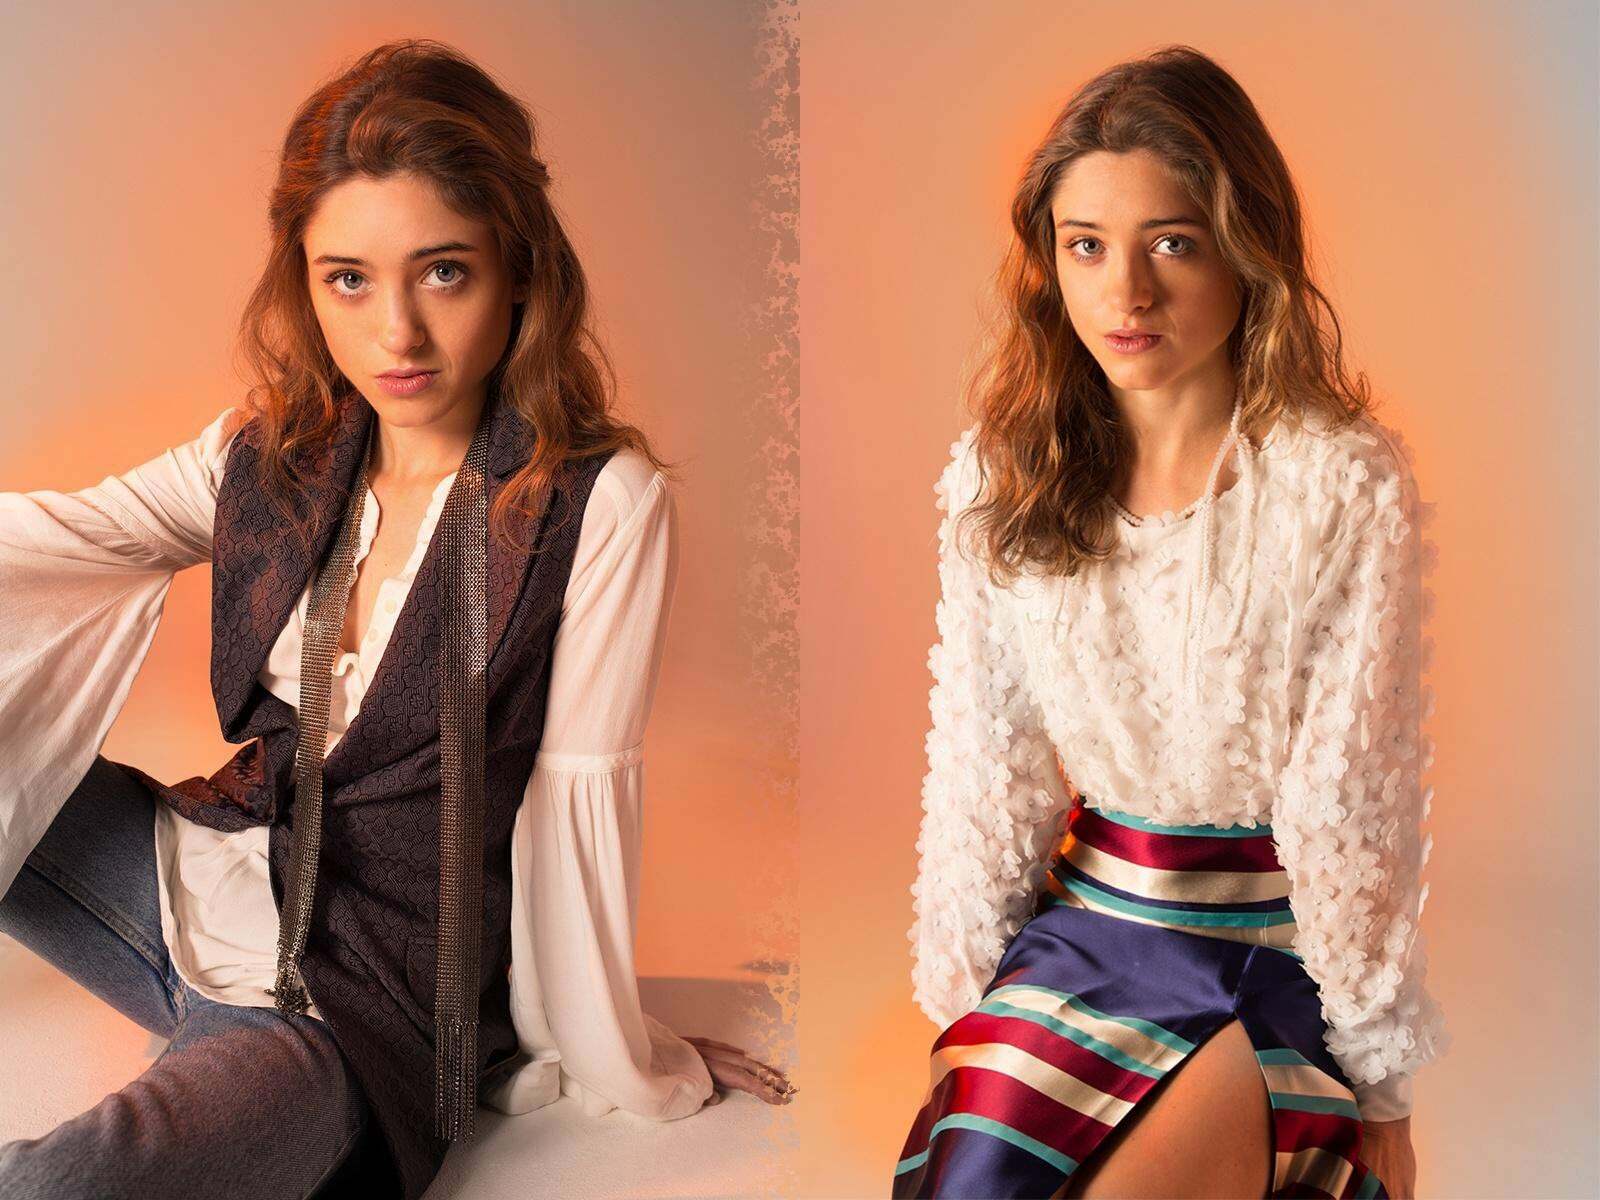 Natalia Dyer is real cute....still want to wreck her though